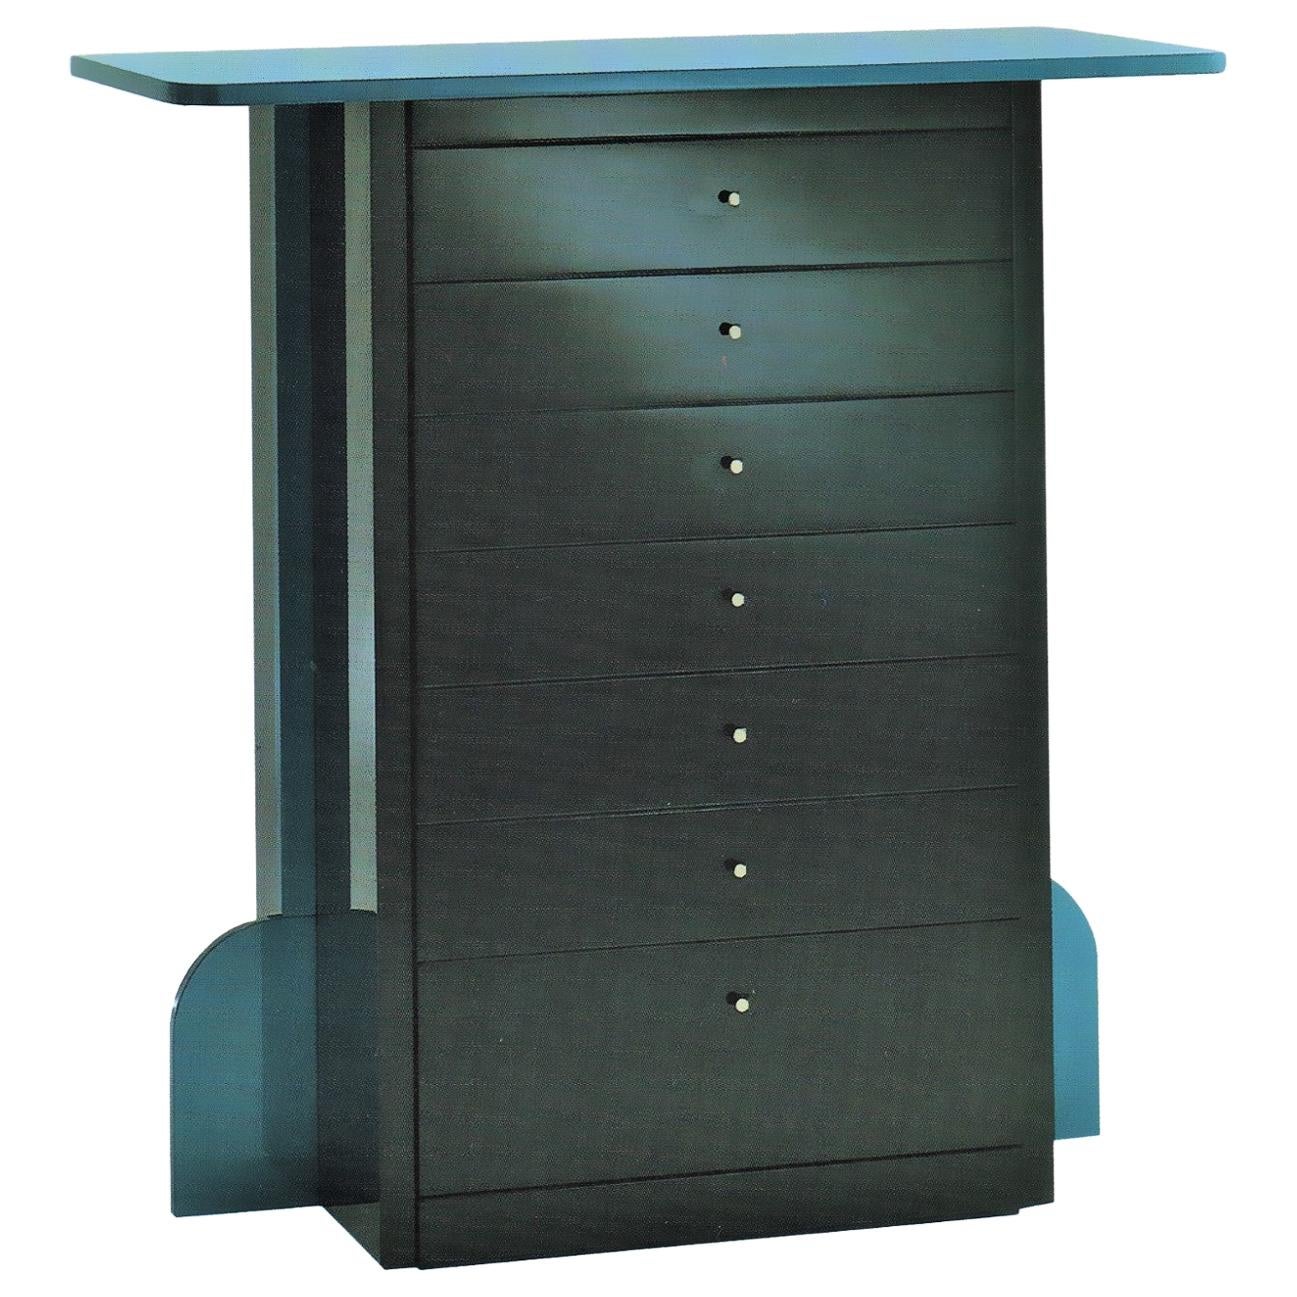 Mid-Century Modern 1989 Memphis Style Dresser Gray and Blue Satin Lacquer, Sormani, Italy For Sale